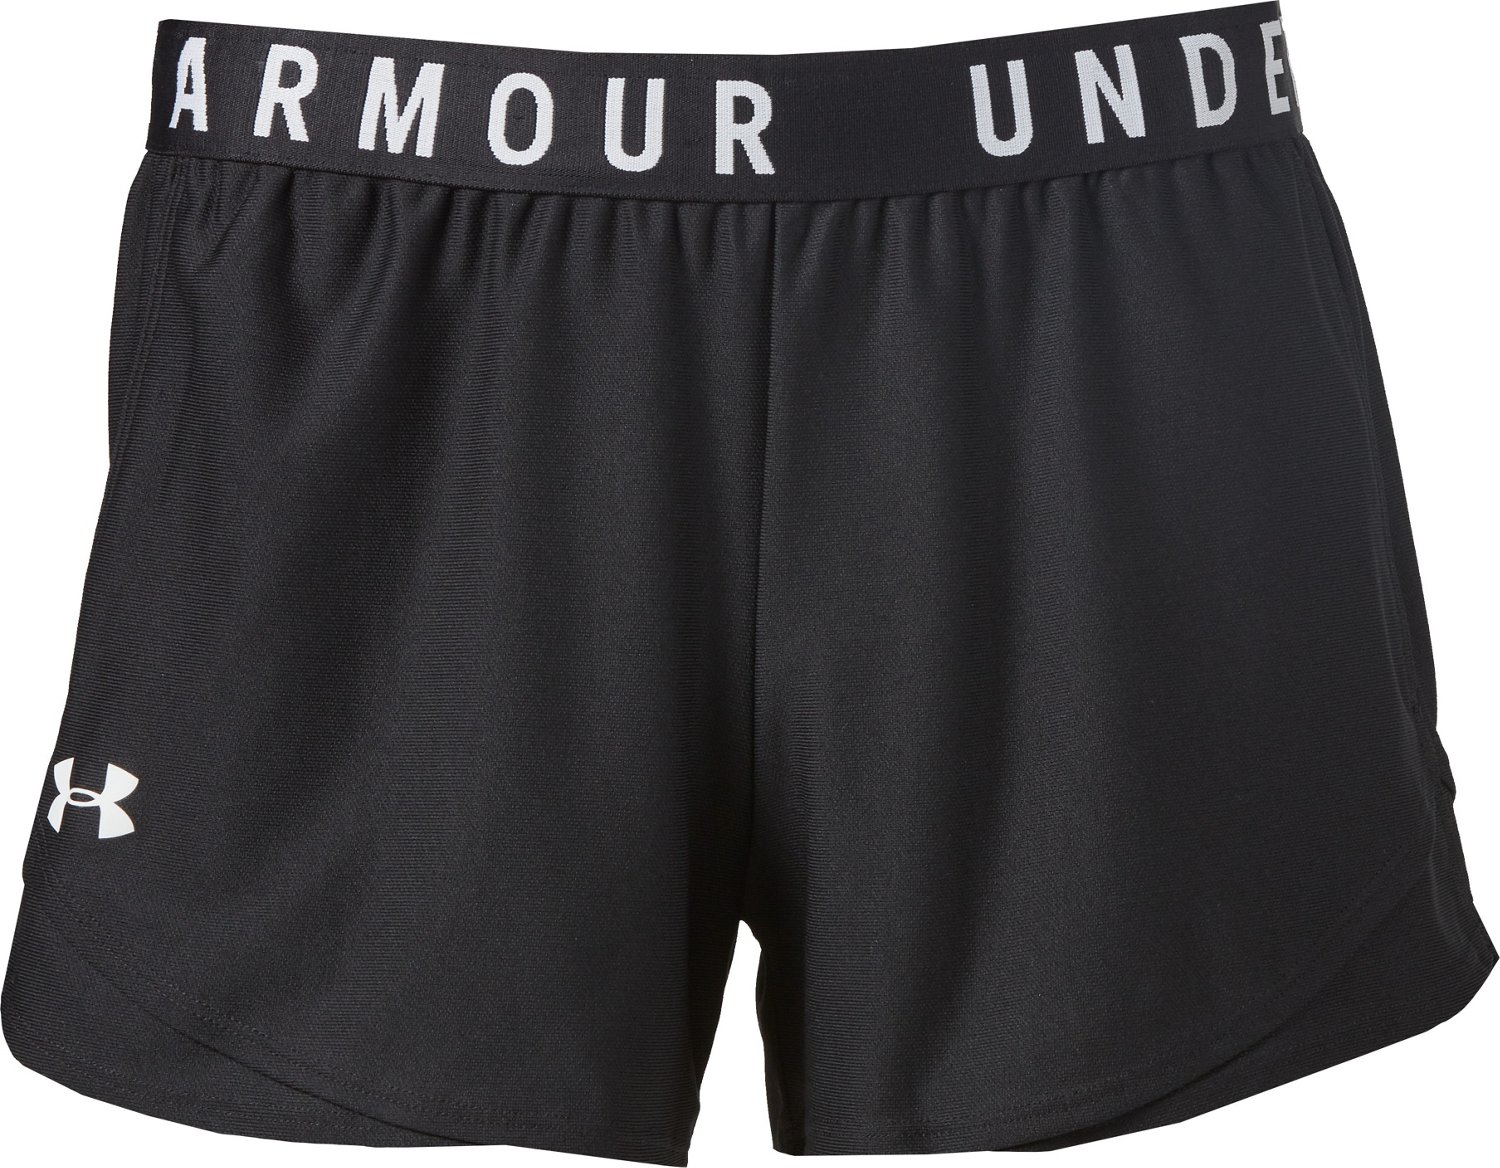 Under Armour Women's Spandex/Compression Shorts – Panther Den at